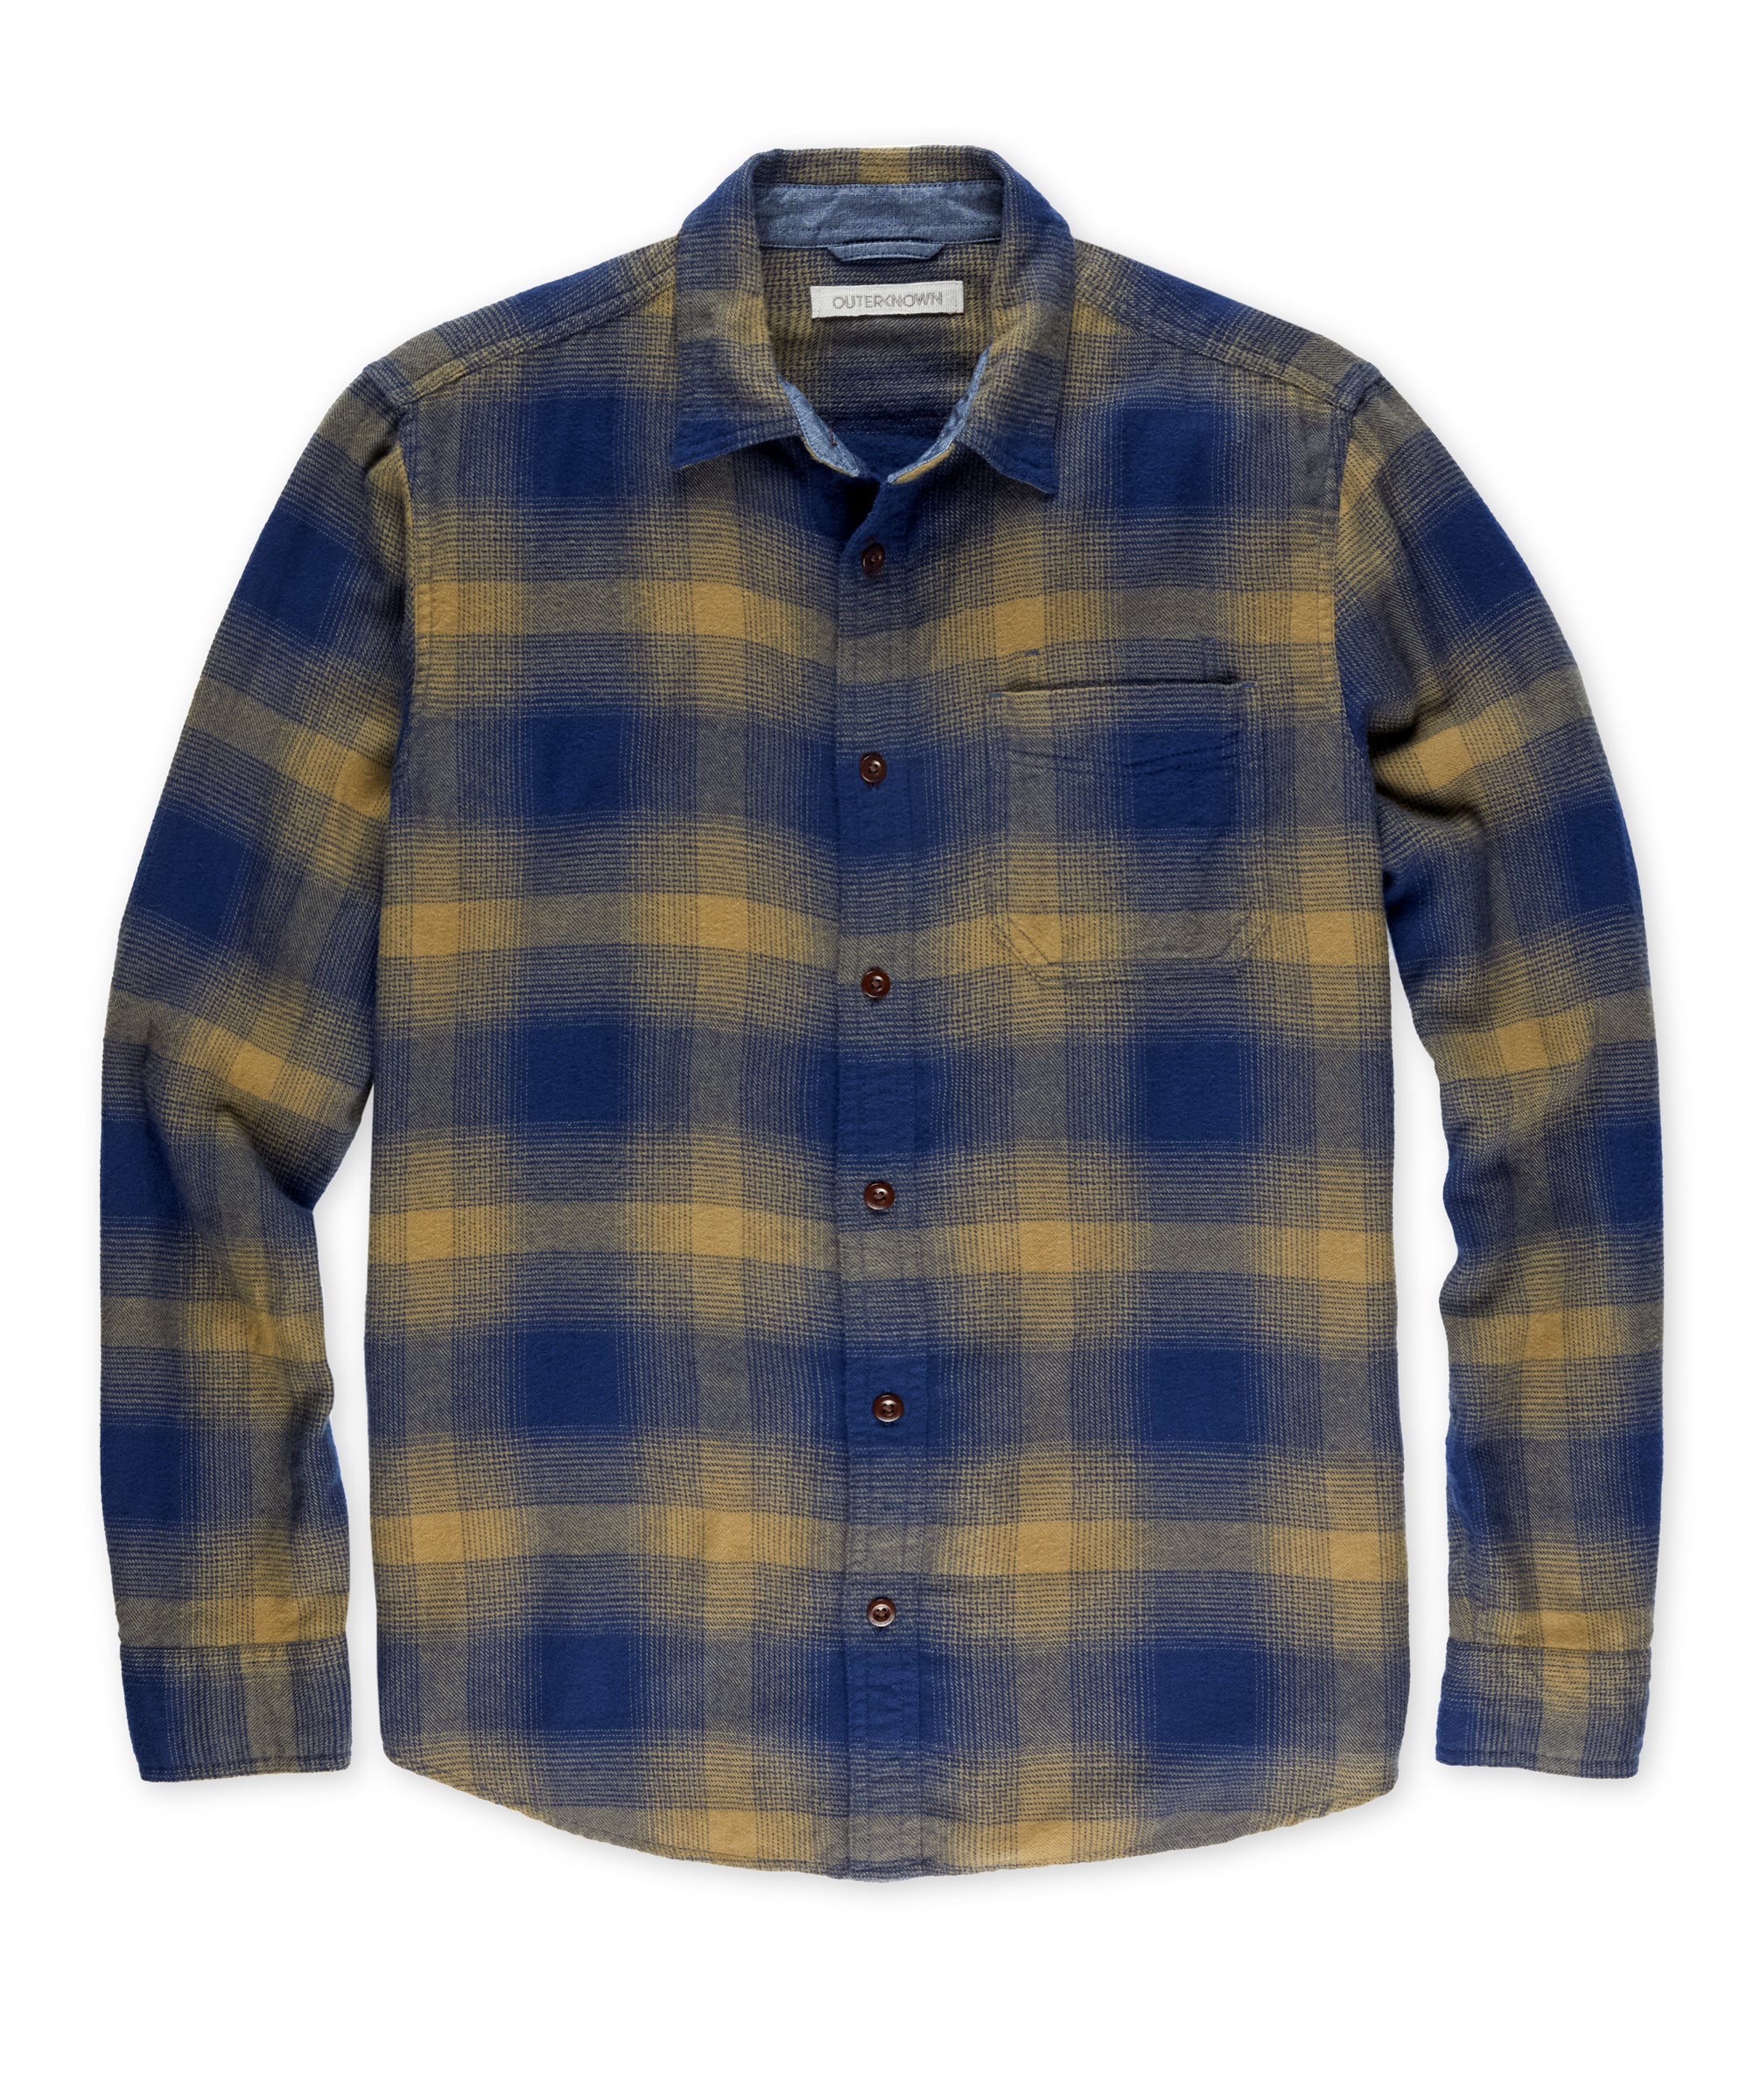 Navy Plaid Flannel Shirt Jacket with White and Violet Crew-neck T-shirt  Outfits For Men (2 ideas & outfits)